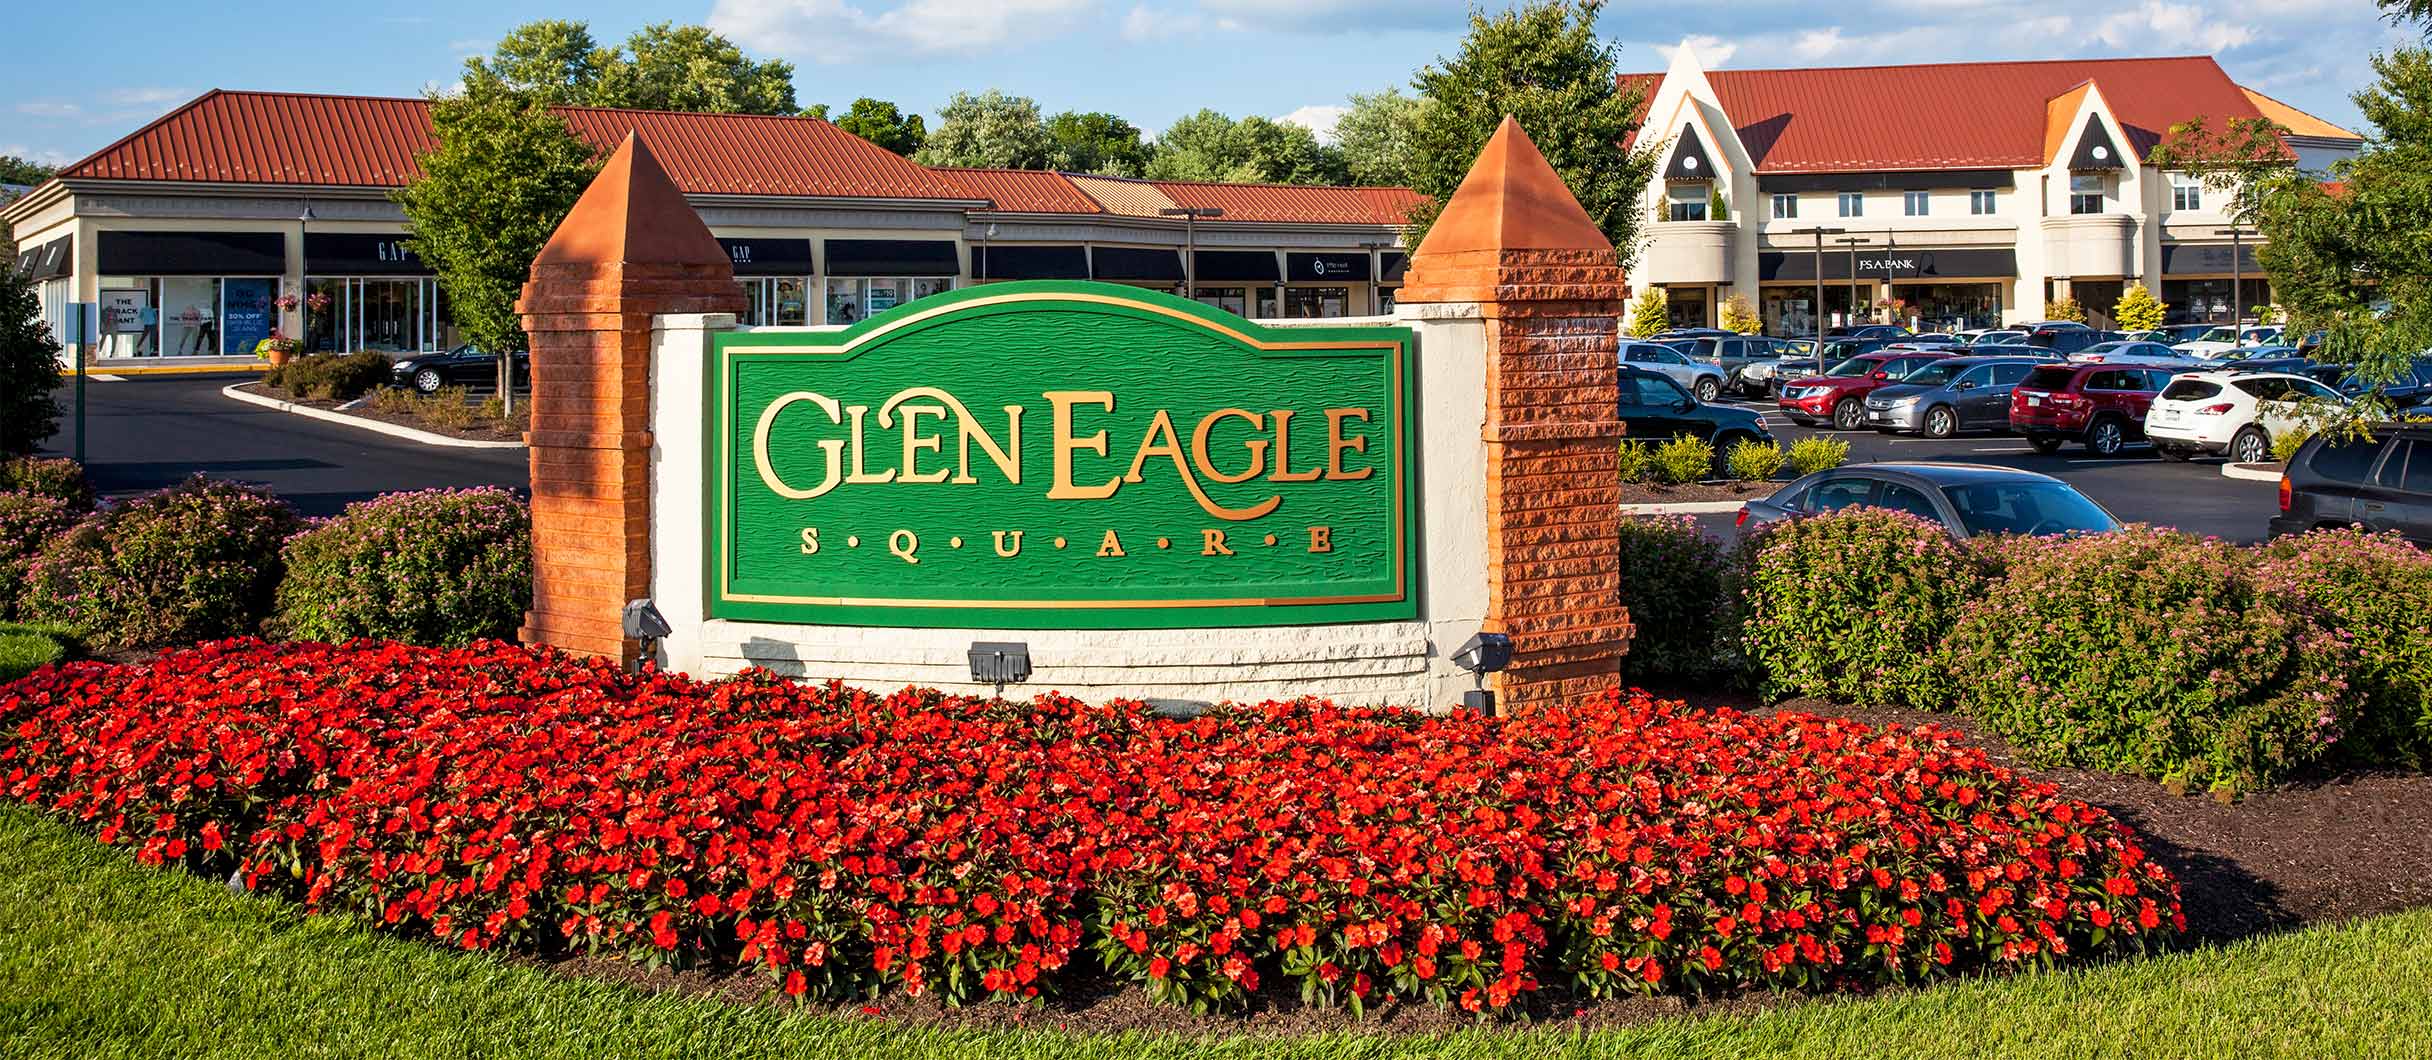 Glen eagle shopping center chadds ford pa #3